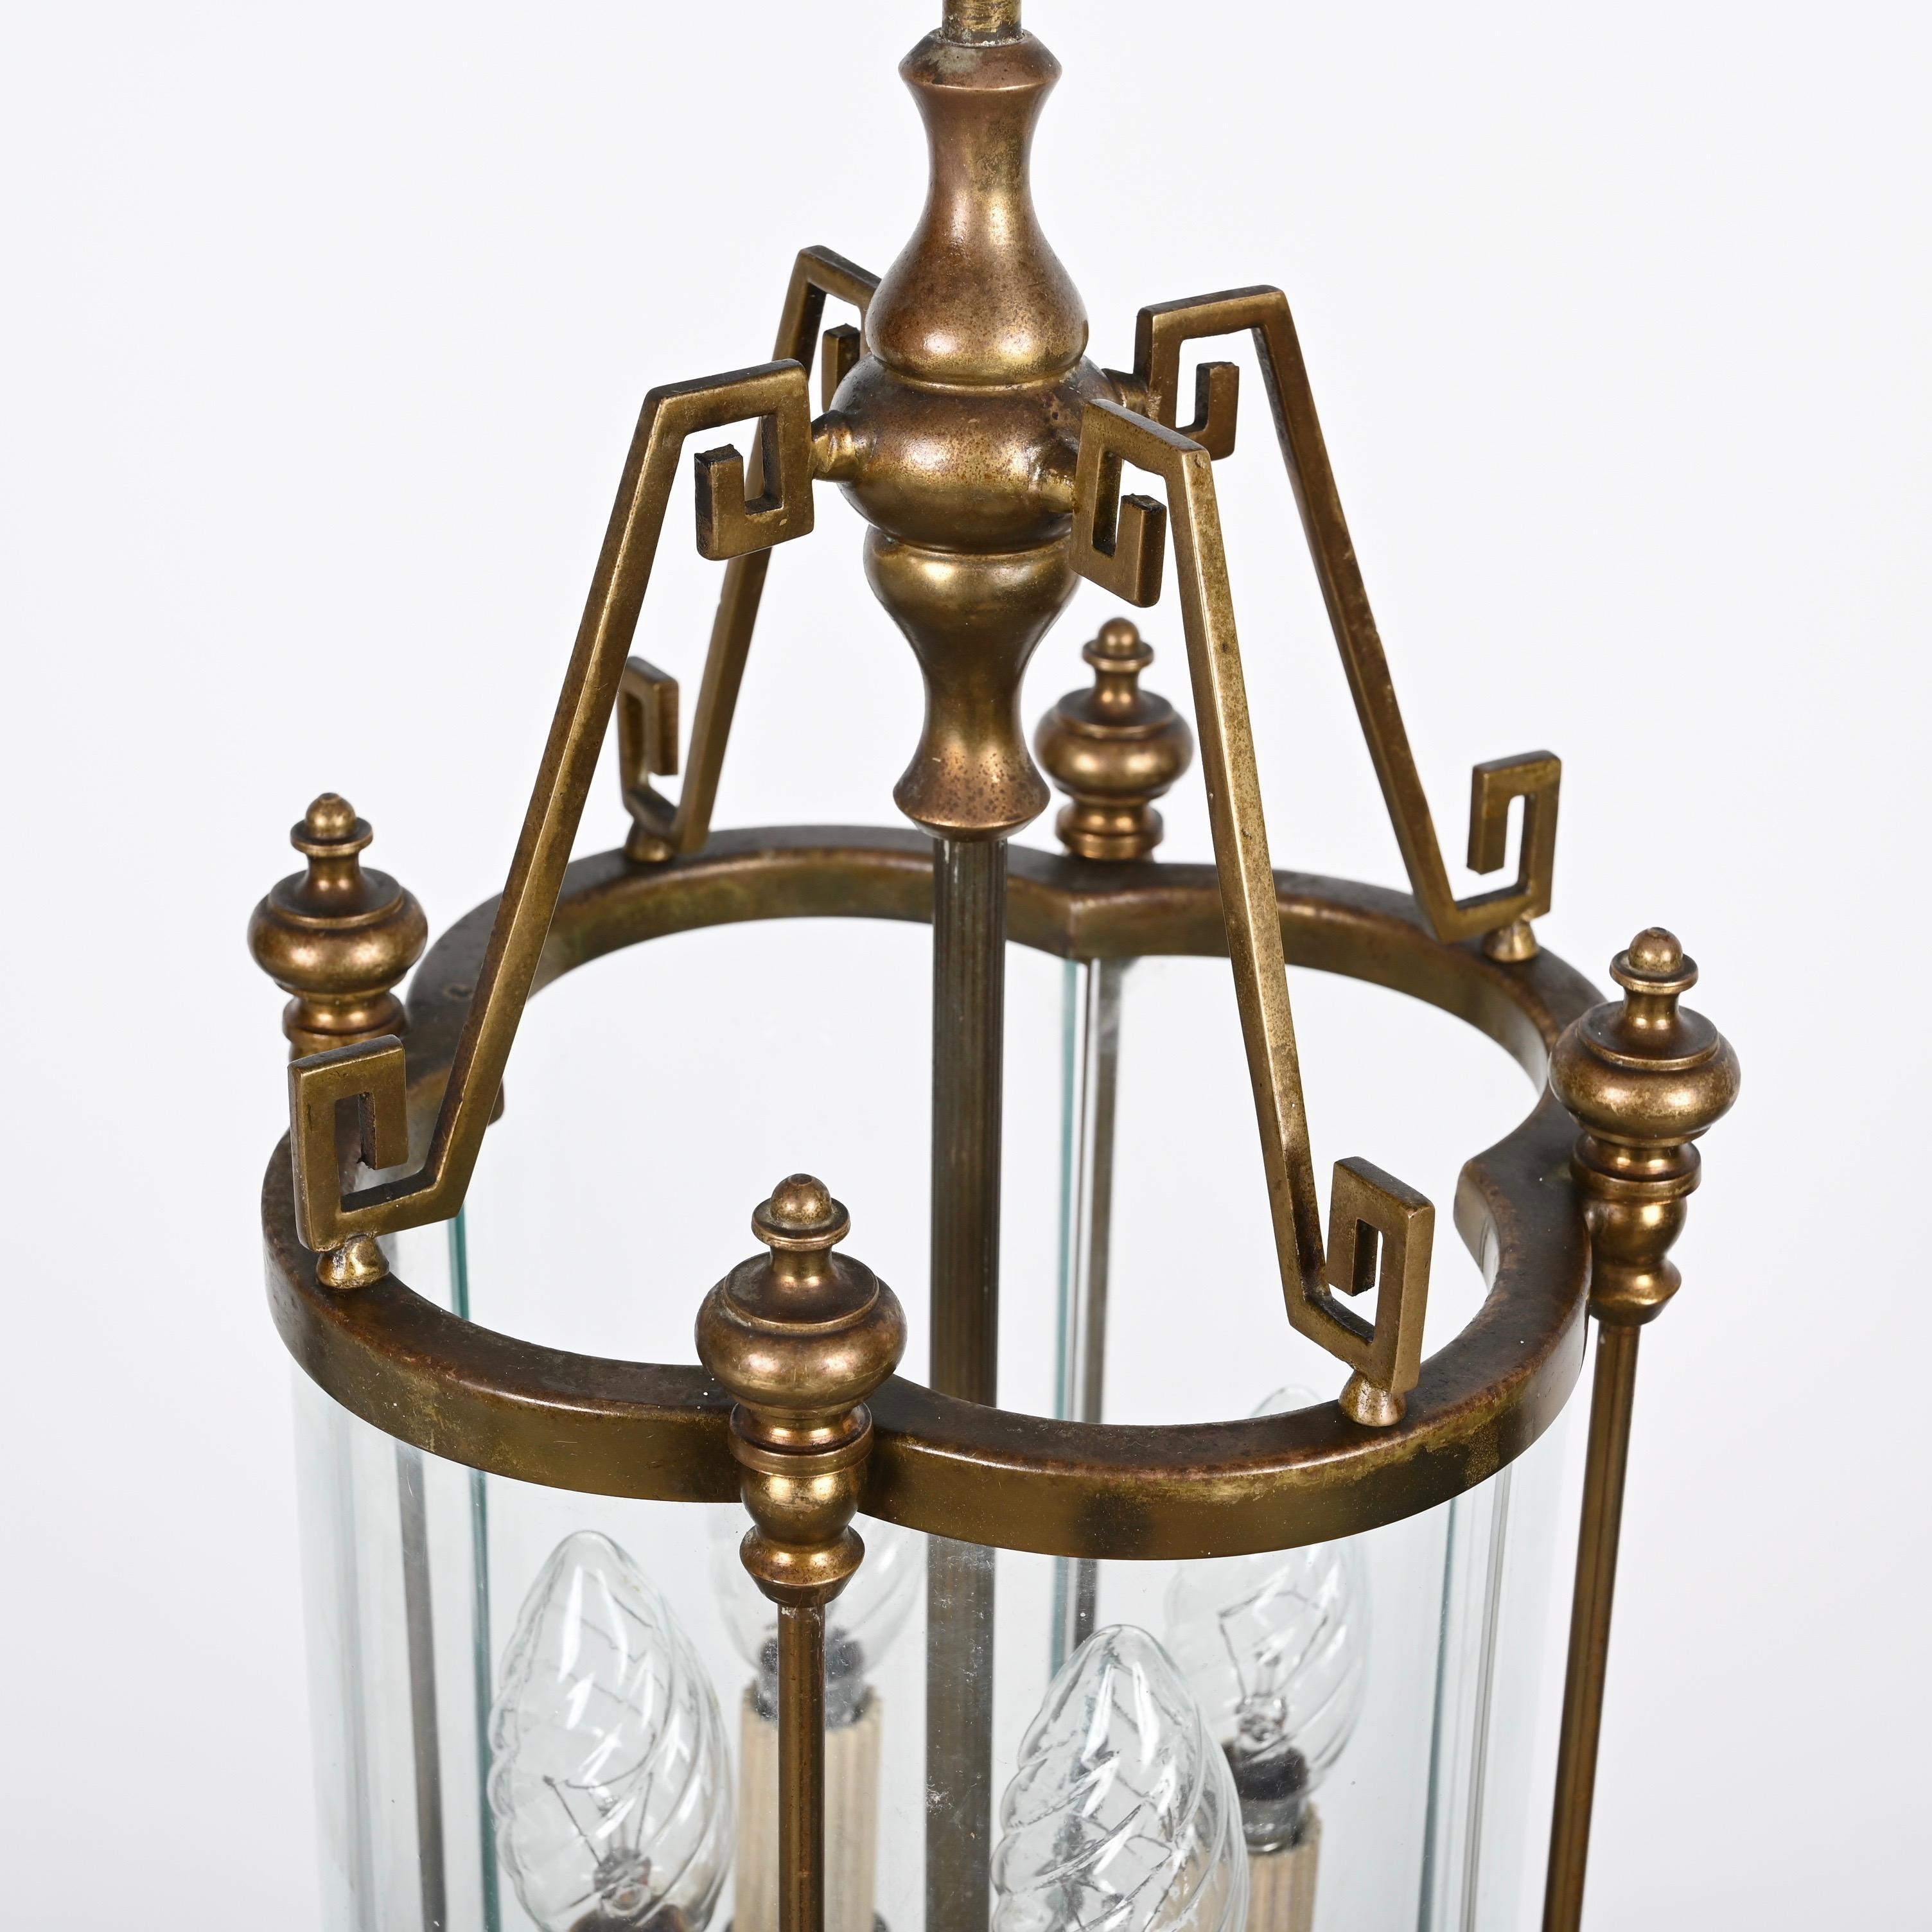 Art Deco Brass and Semicircular Glass Italian Chandelier after Adolf Loos, 1950s For Sale 11